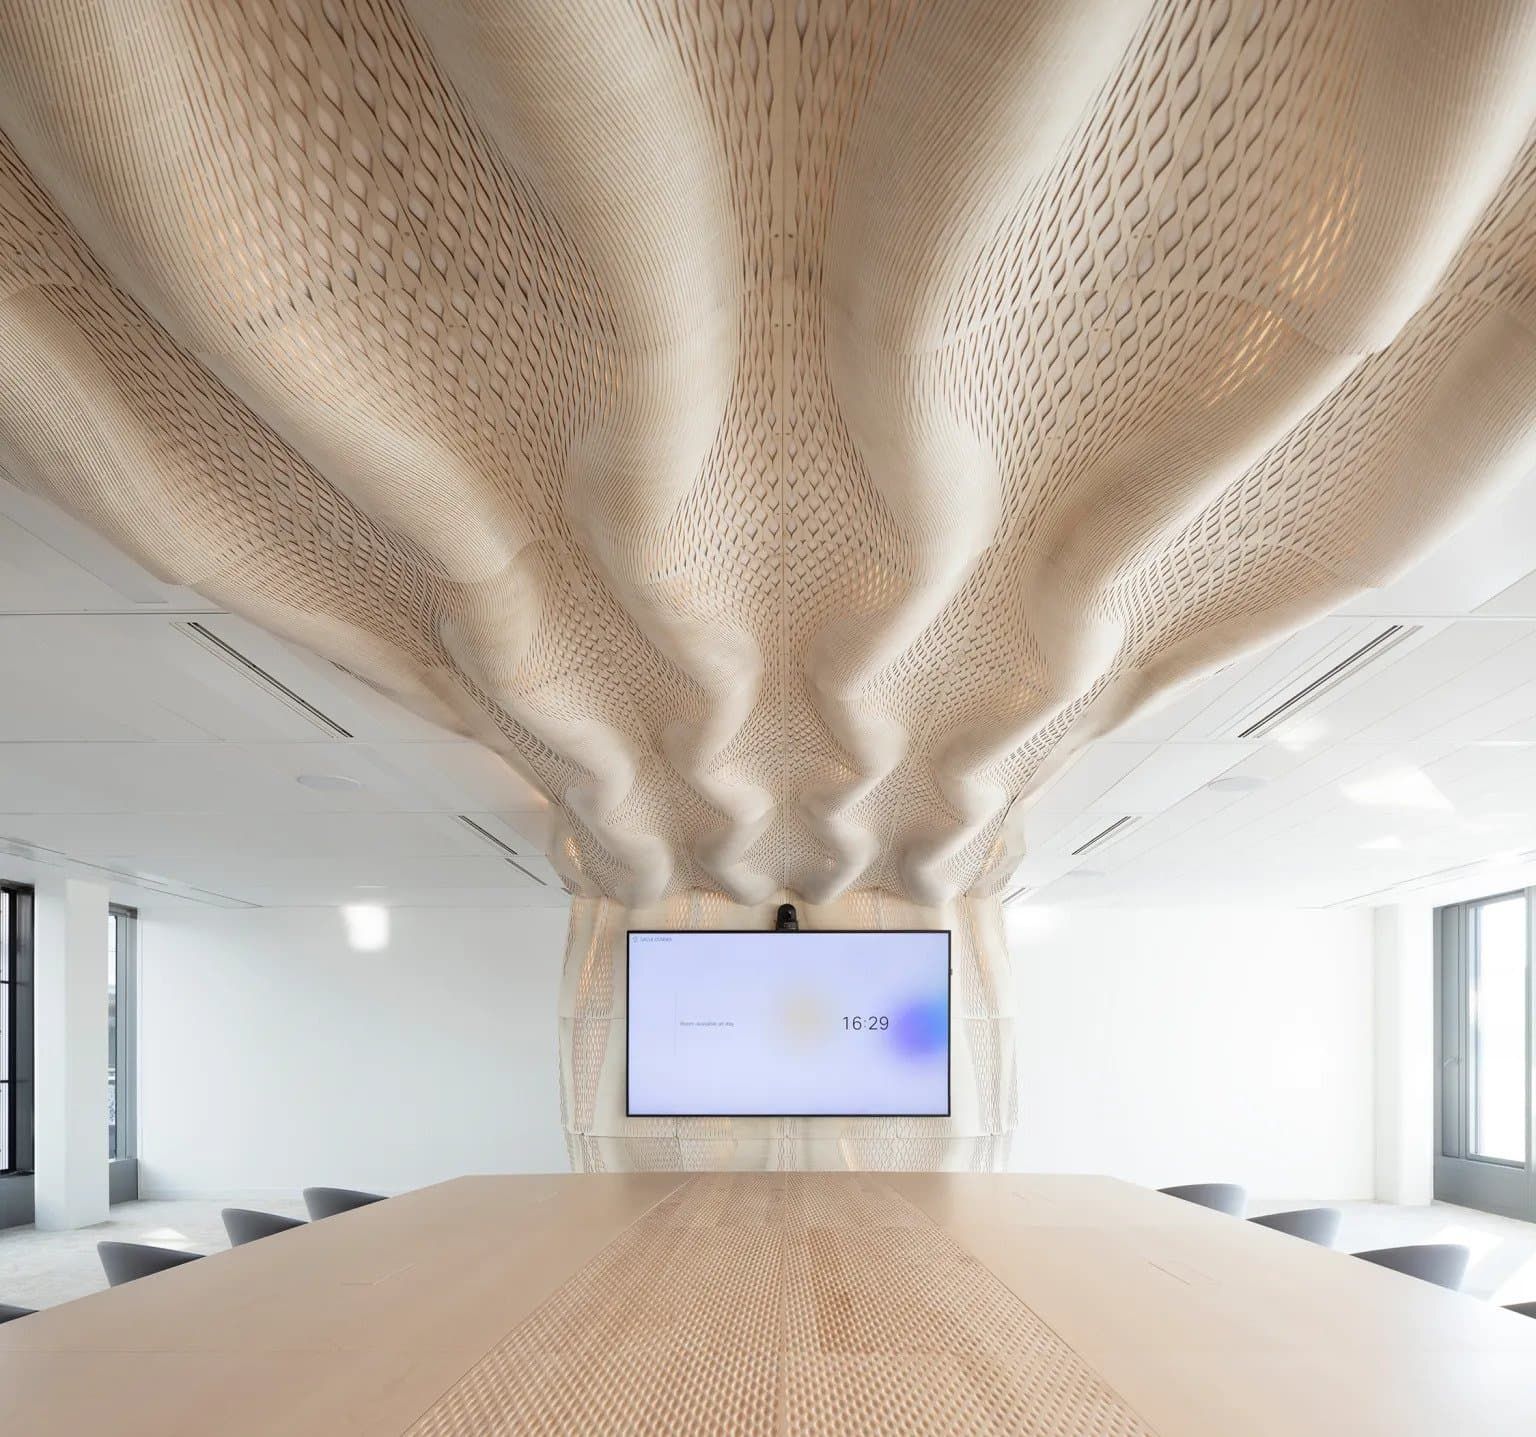 partial parametric ceiling of WoodenWaves inside an office